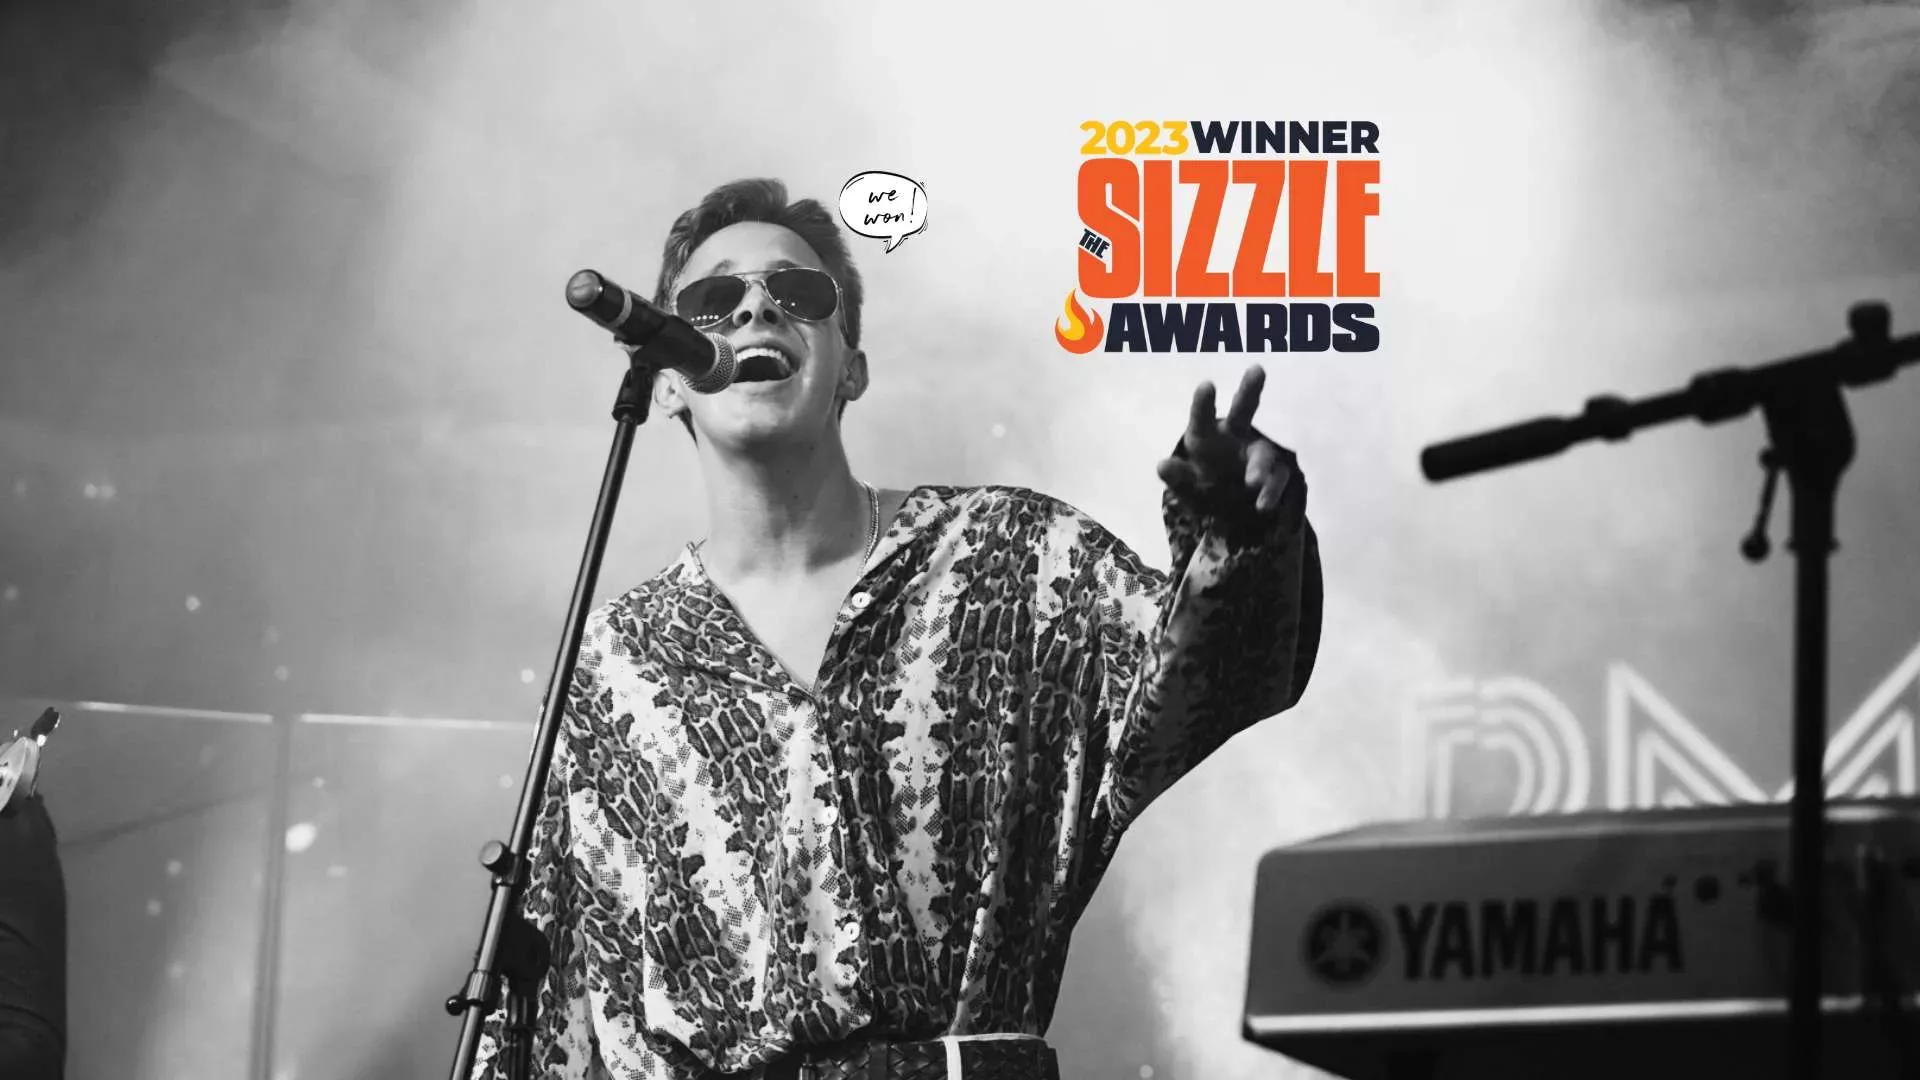 ROOTS Academy Clinches 3rd Place in “Best Youth Arts/Music Program” at the 2023 FranklinIs Sizzle Awards!Graphic